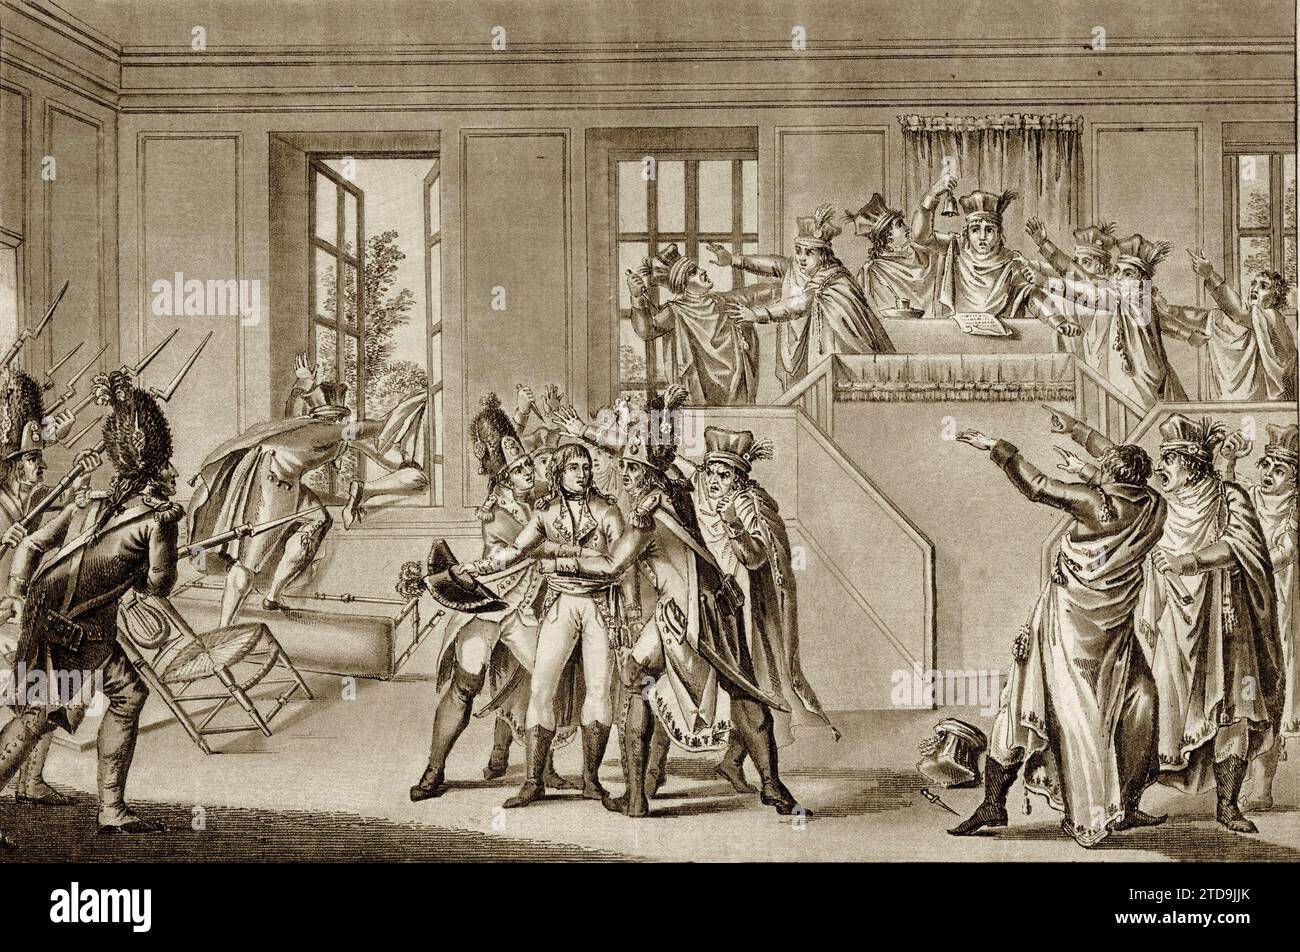 Consulate: 'Napoleon Bonaparte (1769-1821) at the Saint Cloud seance on 18 brumaire (9/11/1799)'. Napoleon Bonaparte's coup d'état on 18 Brumaire at the Conseil des Cinq-Cents (Five Hundred) (salle des 500), protected by grenadiers, put an end to the Directoire and gave birth to the Consulate. Stock Photo